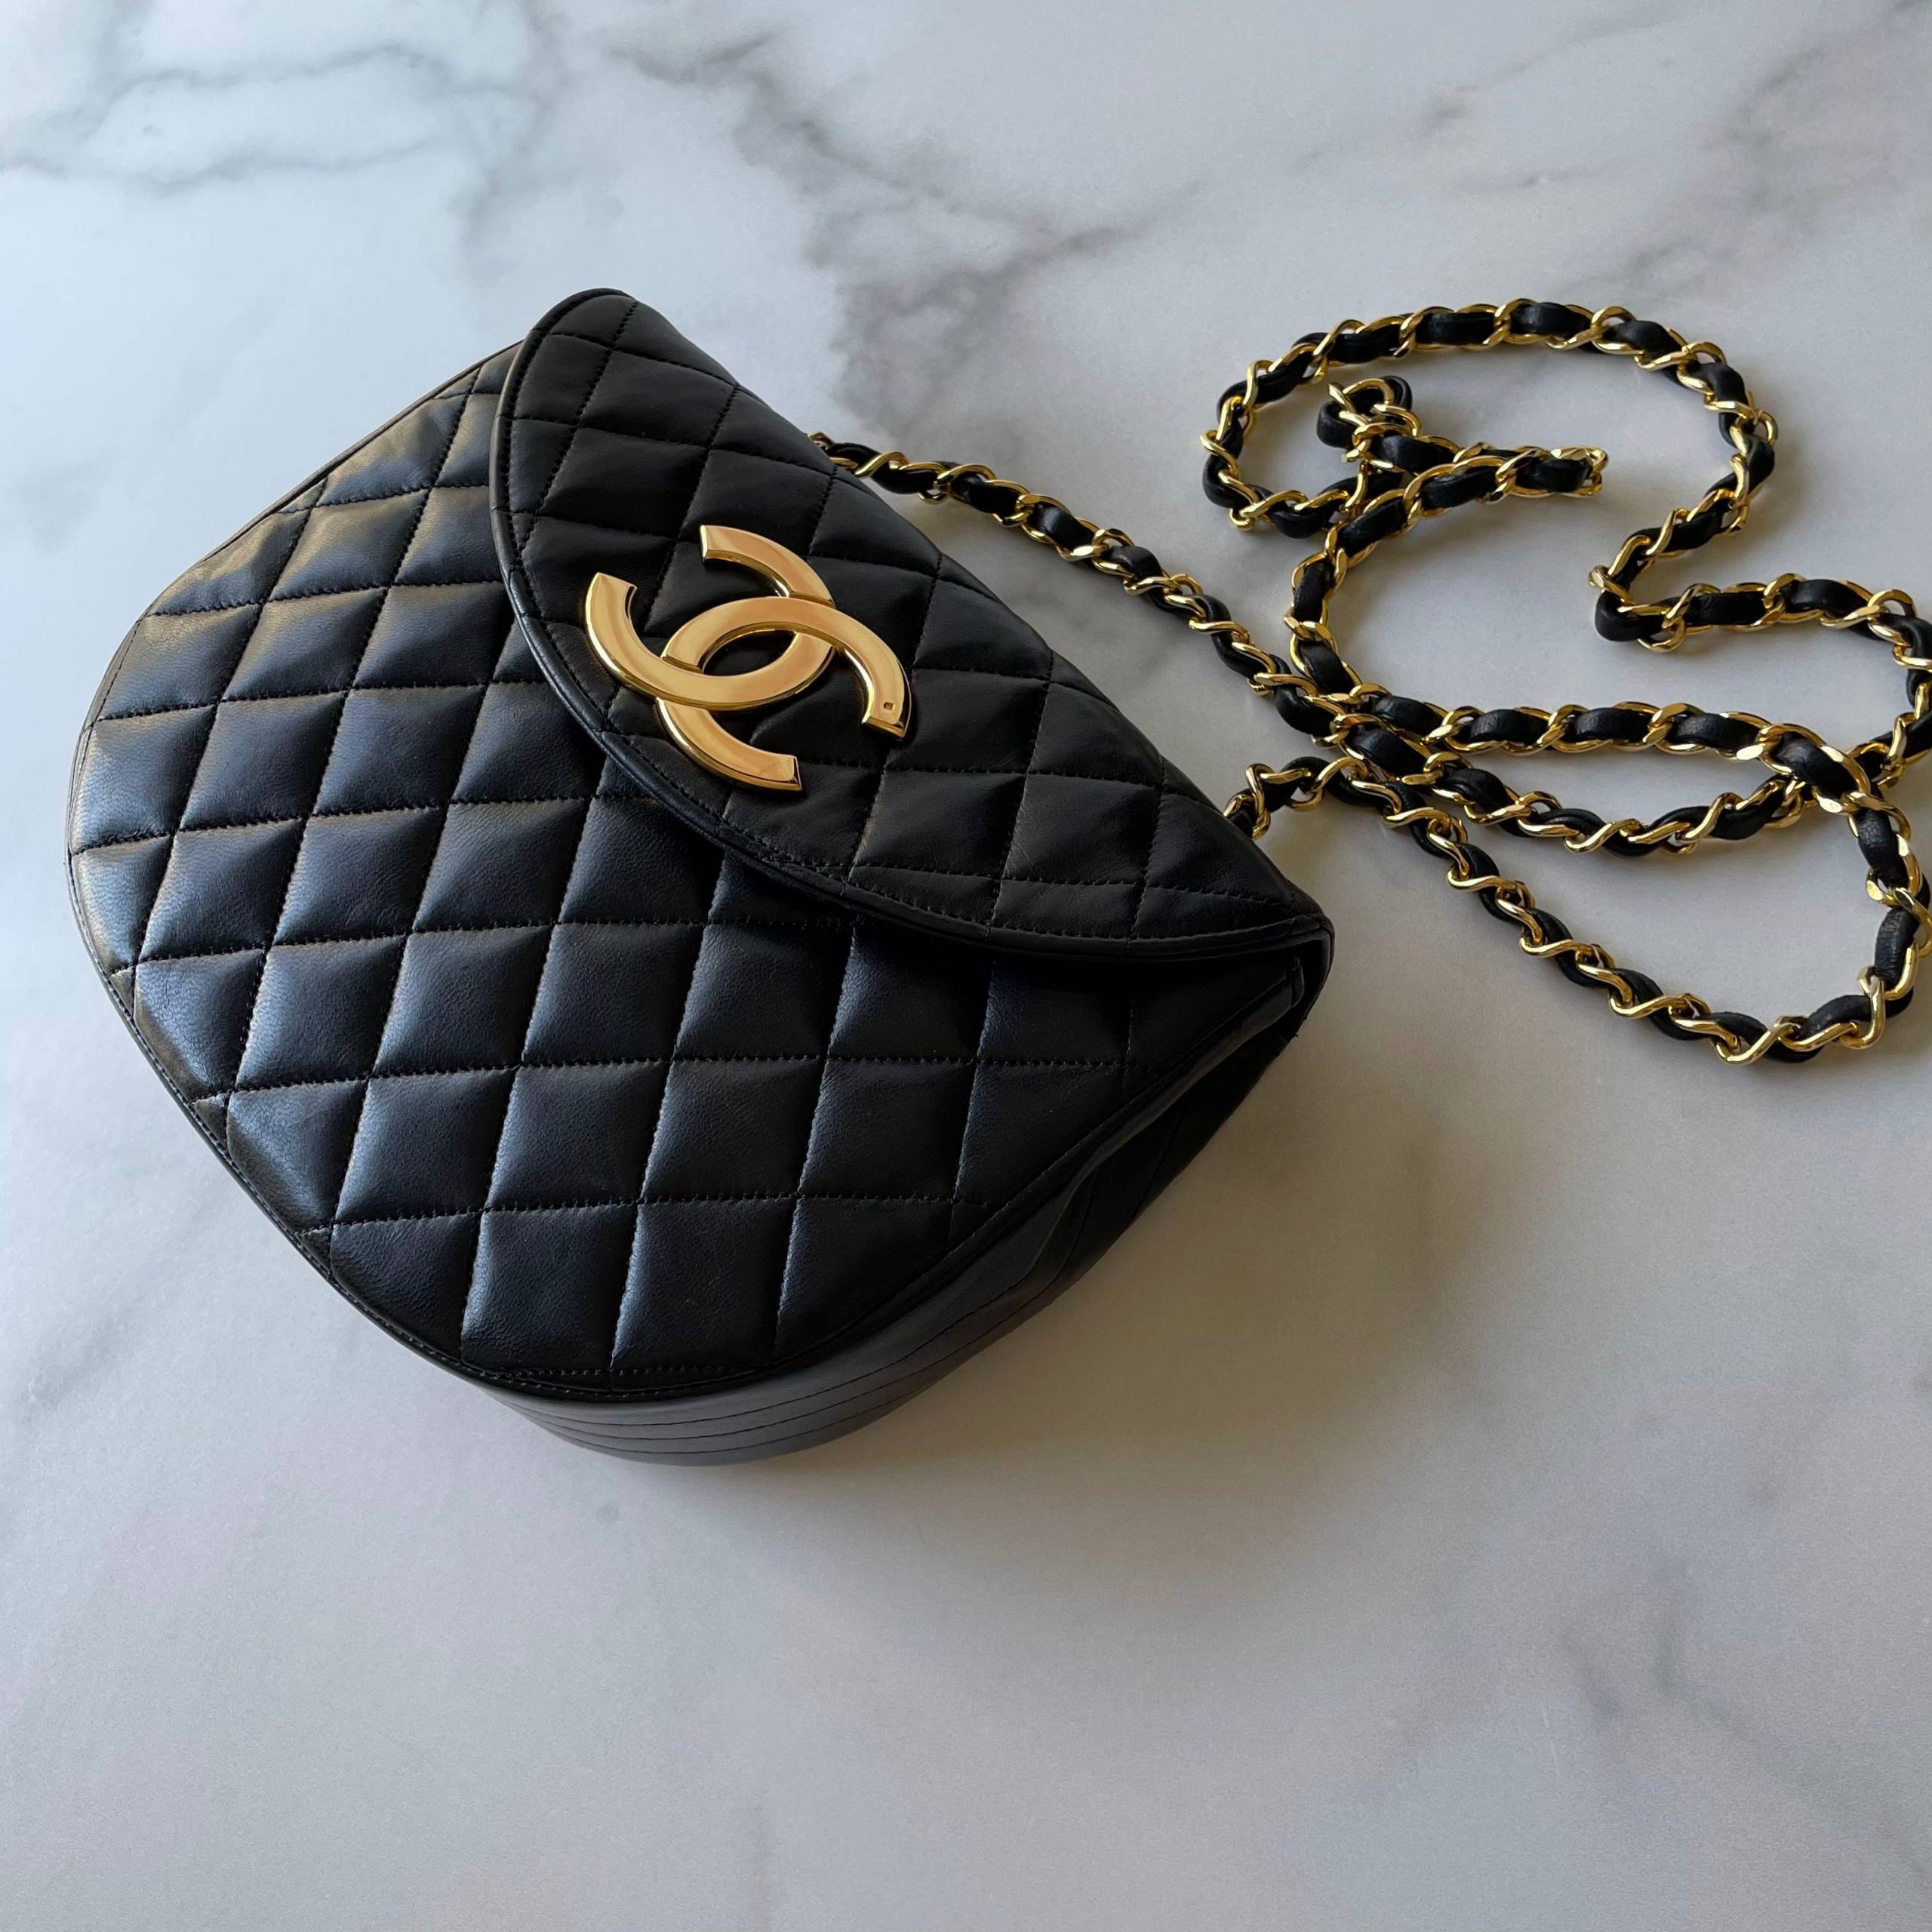 Everything You Should Know About Vintage Chanel Handbags: Q & A